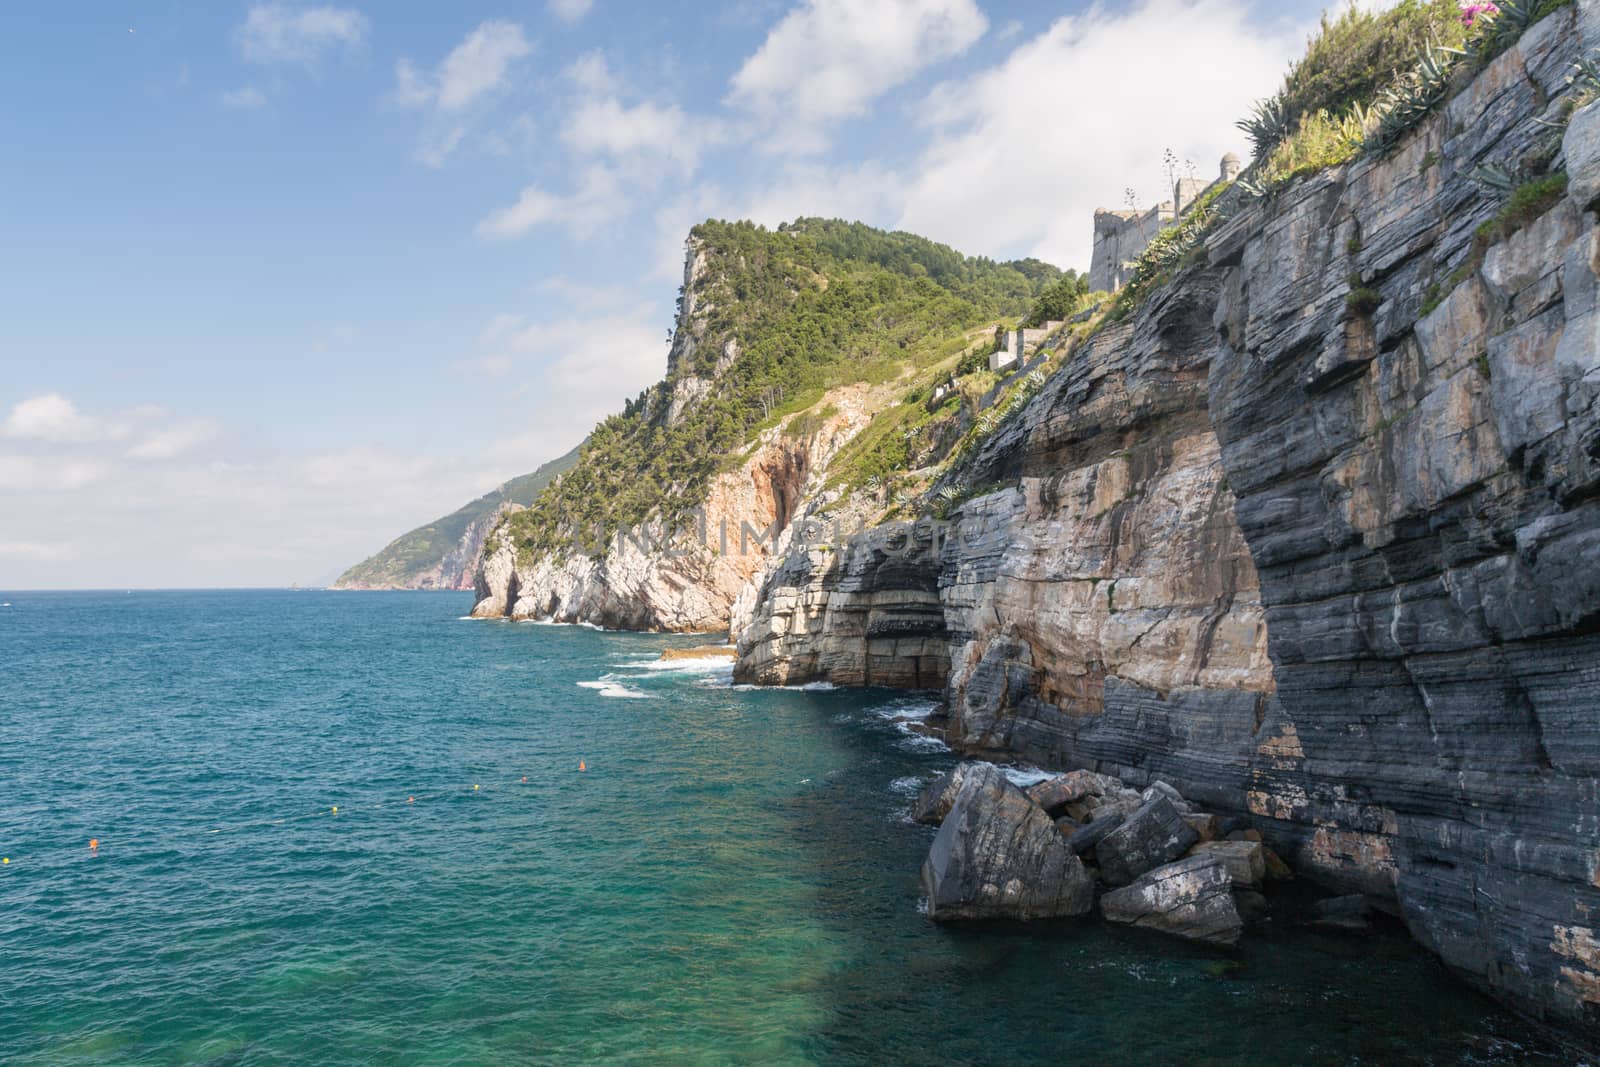 The coastline from Portovenere in the Ligurian region of Italy by chrisukphoto